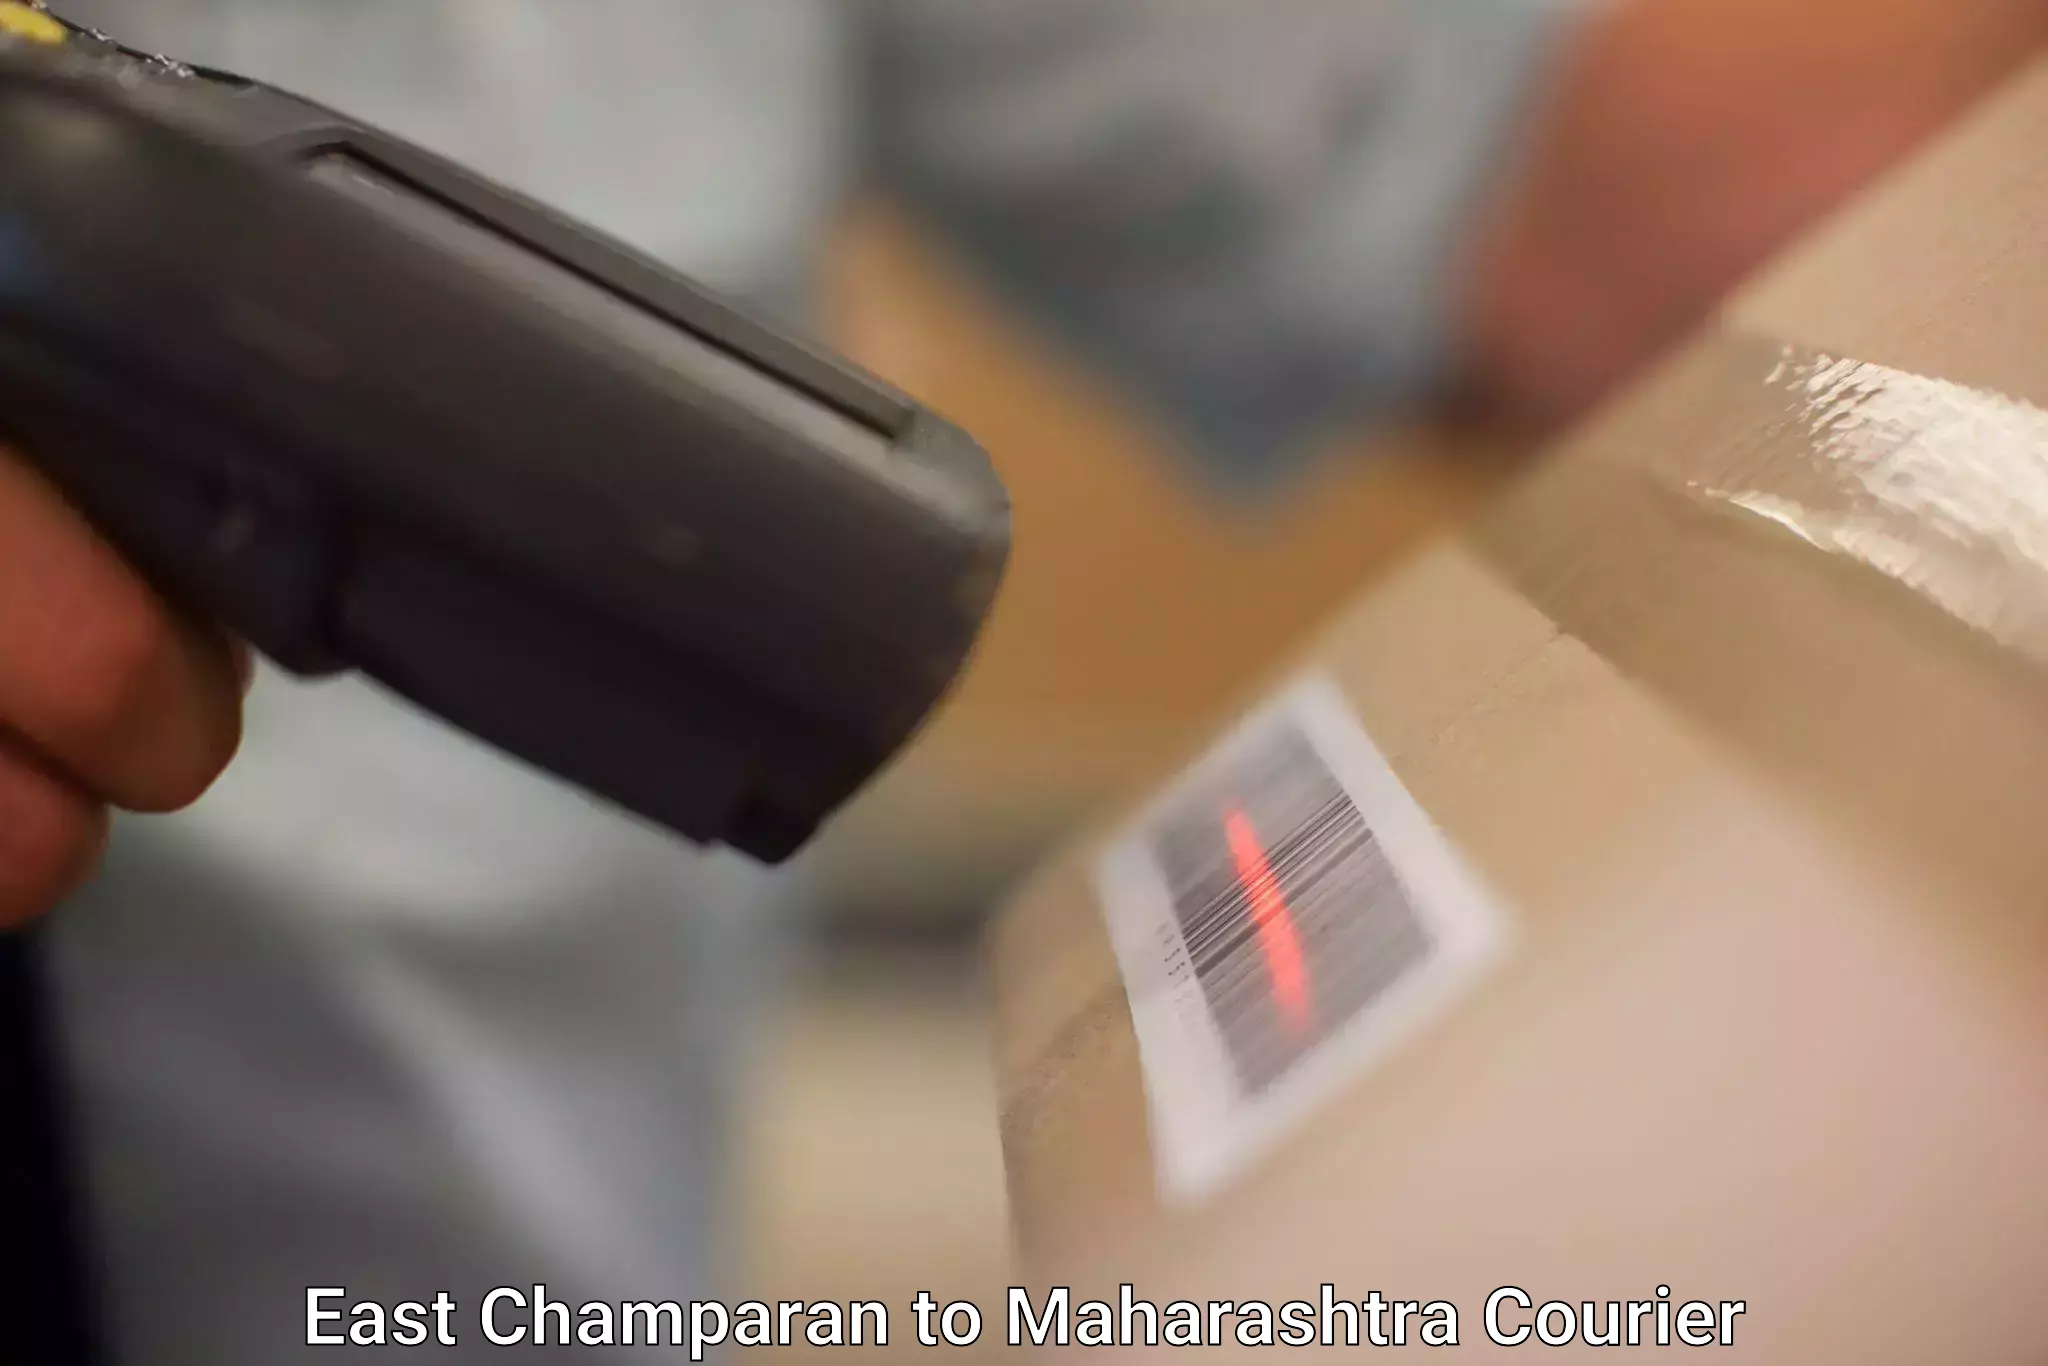 State-of-the-art courier technology East Champaran to Maharashtra